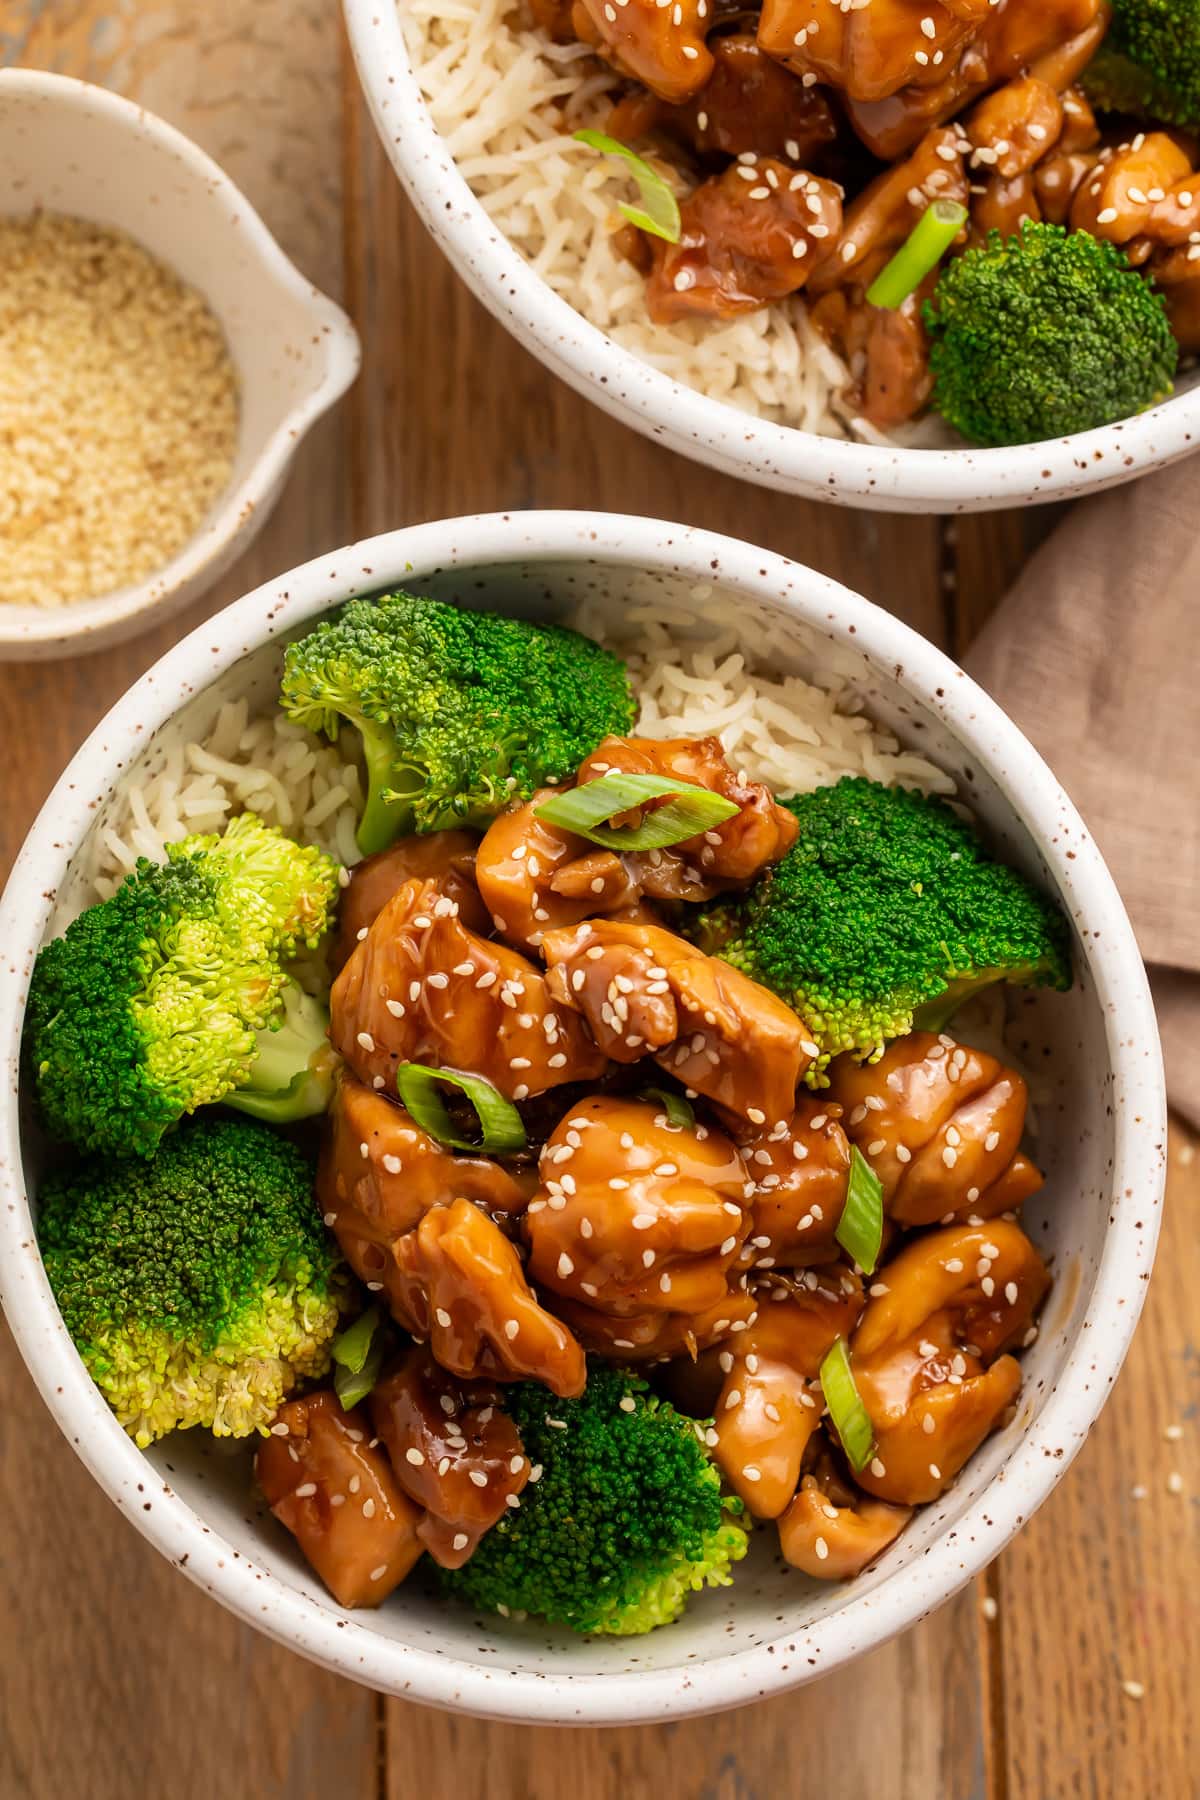 Overhead look at a white bowl holding Instant Pot chicken teriyaki with bright green broccoli and steamed white rice.